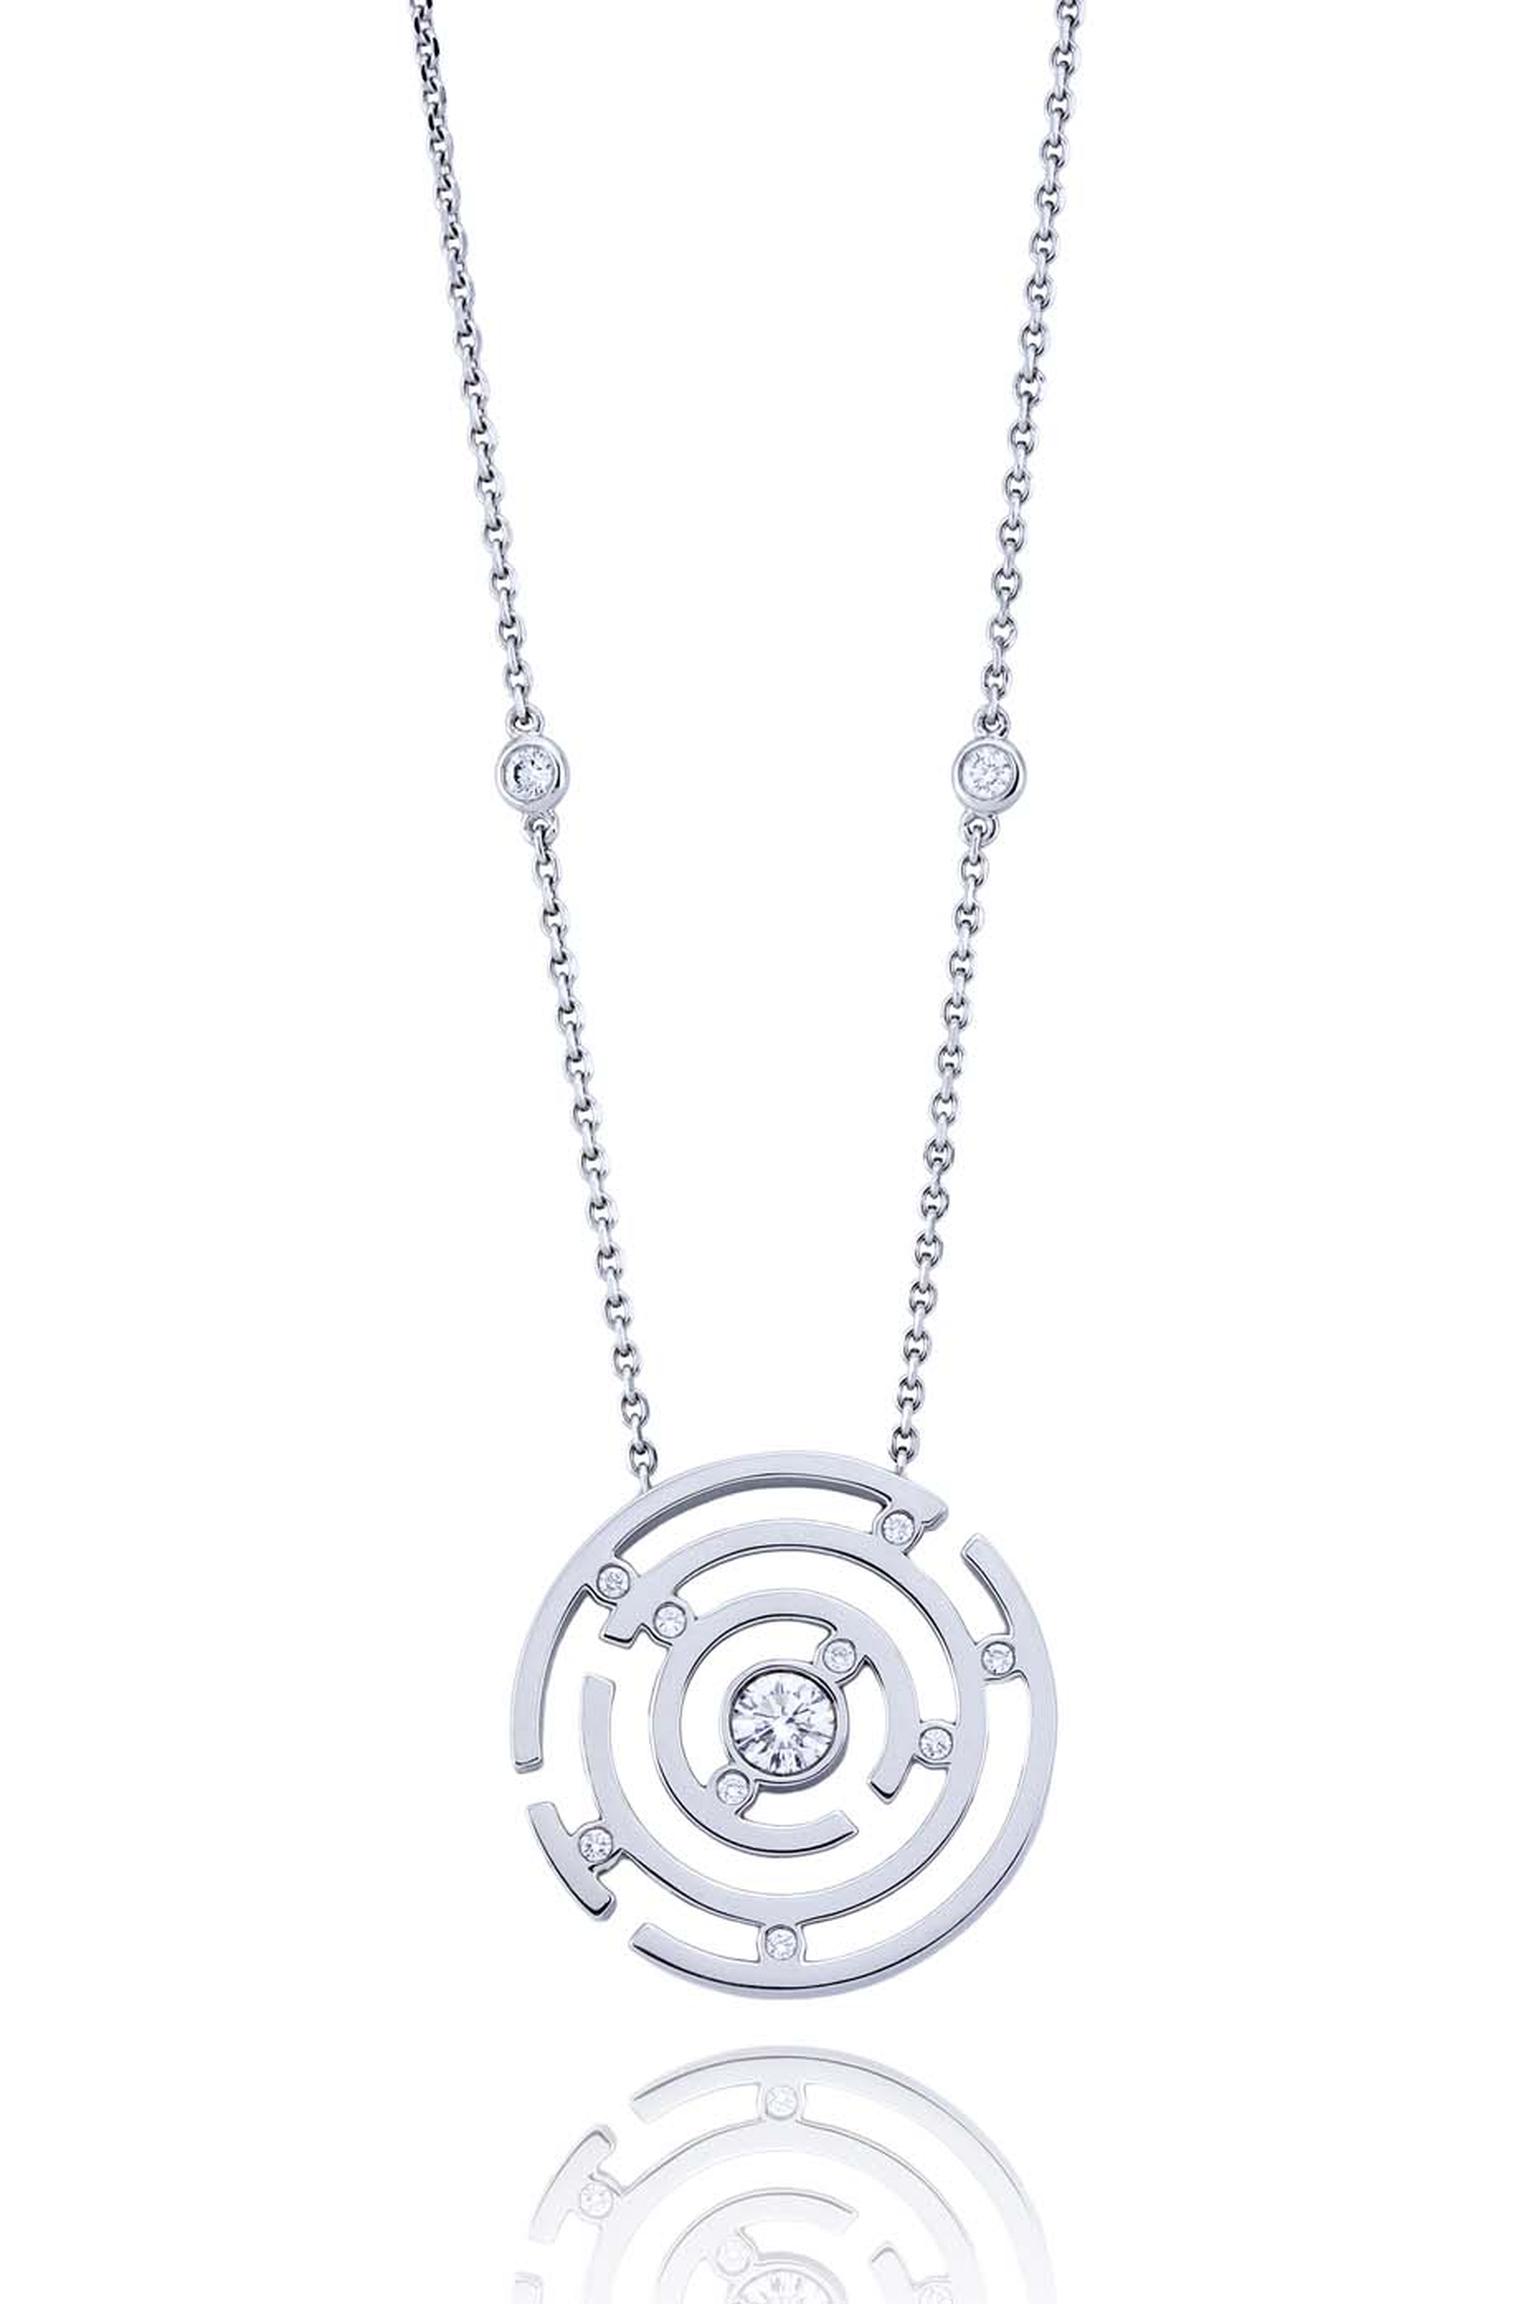 Boodles Maze collection provides a bird’s-eye view of the maze such as with the Maze diamond pendant in white gold.